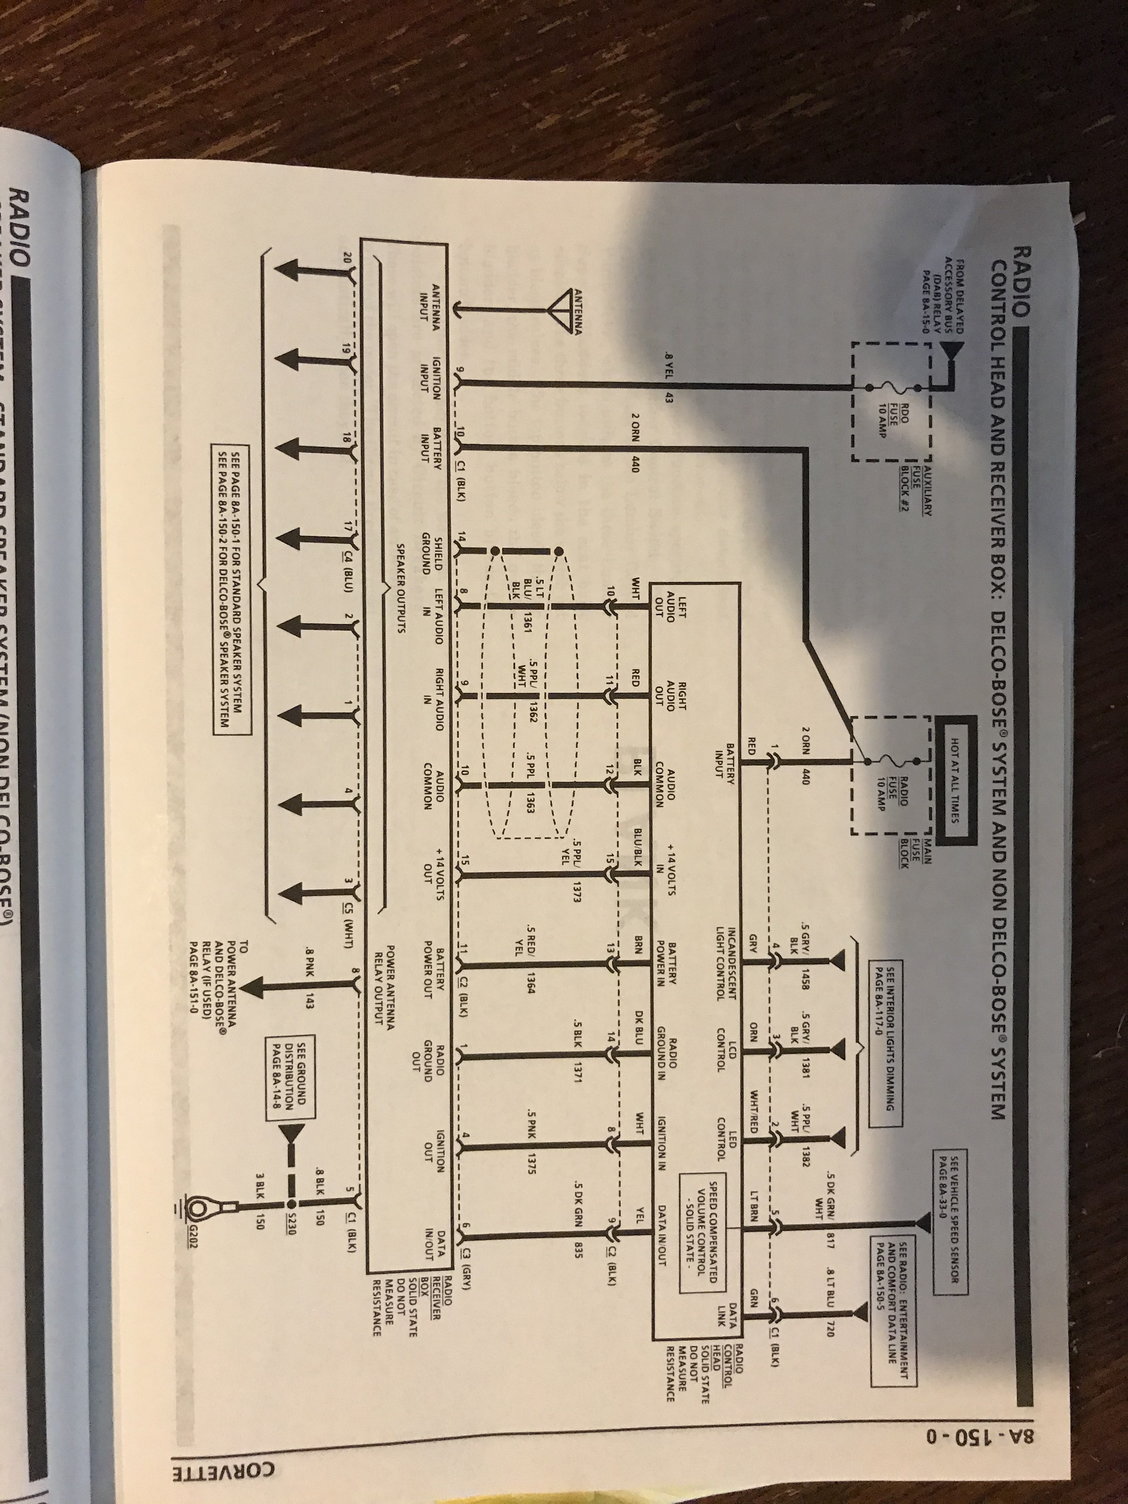 Delco Bose Gold Series Wiring Diagram Collection